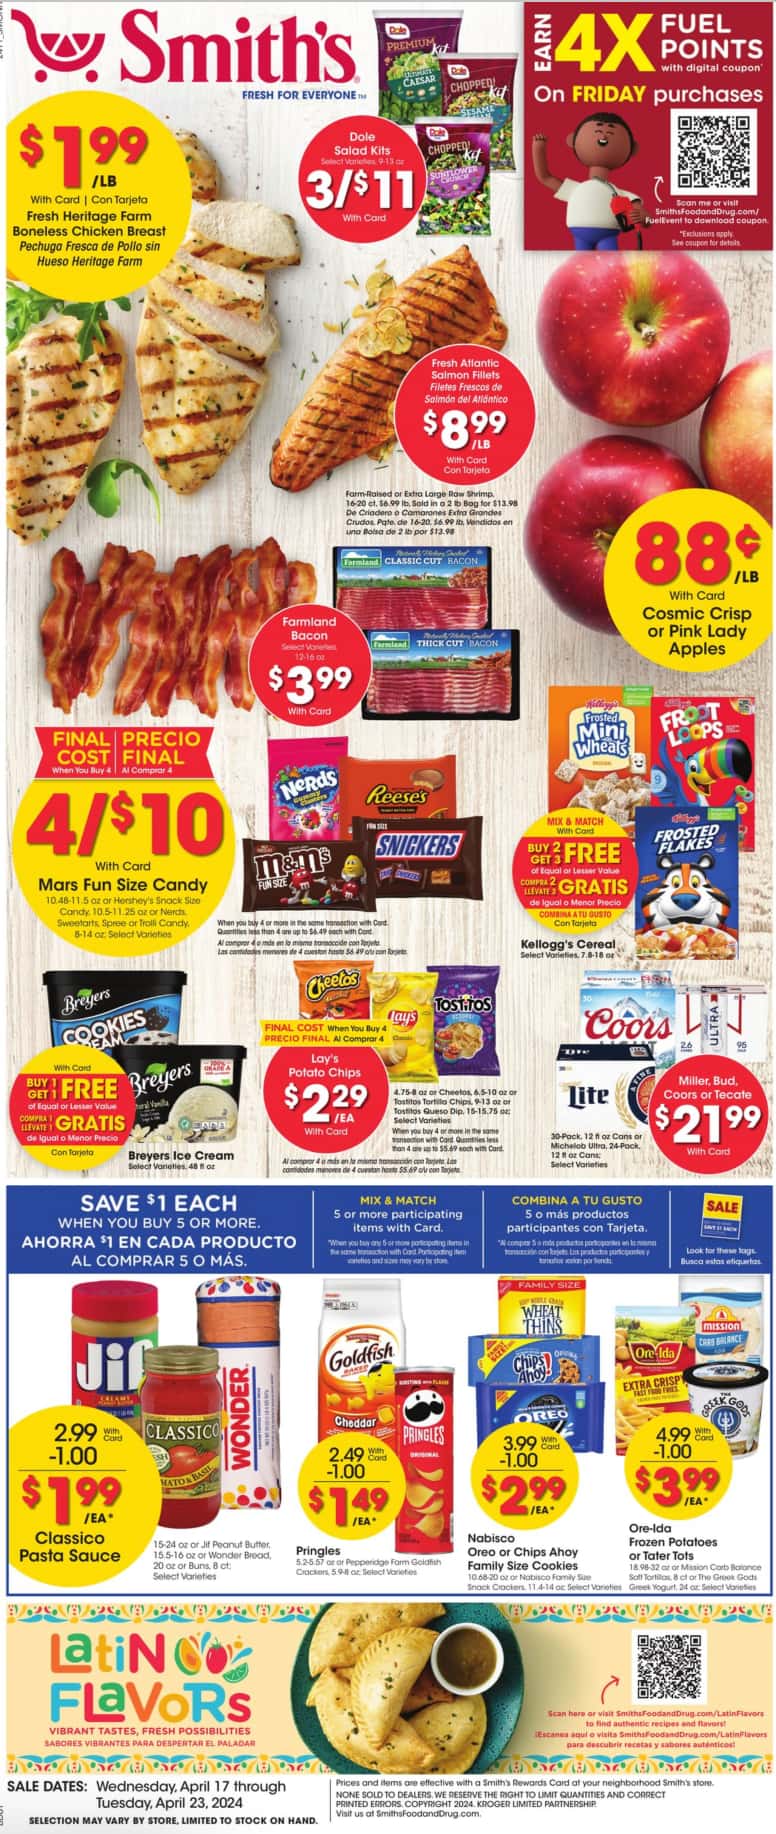 Smiths_weekly_ad_041724_01